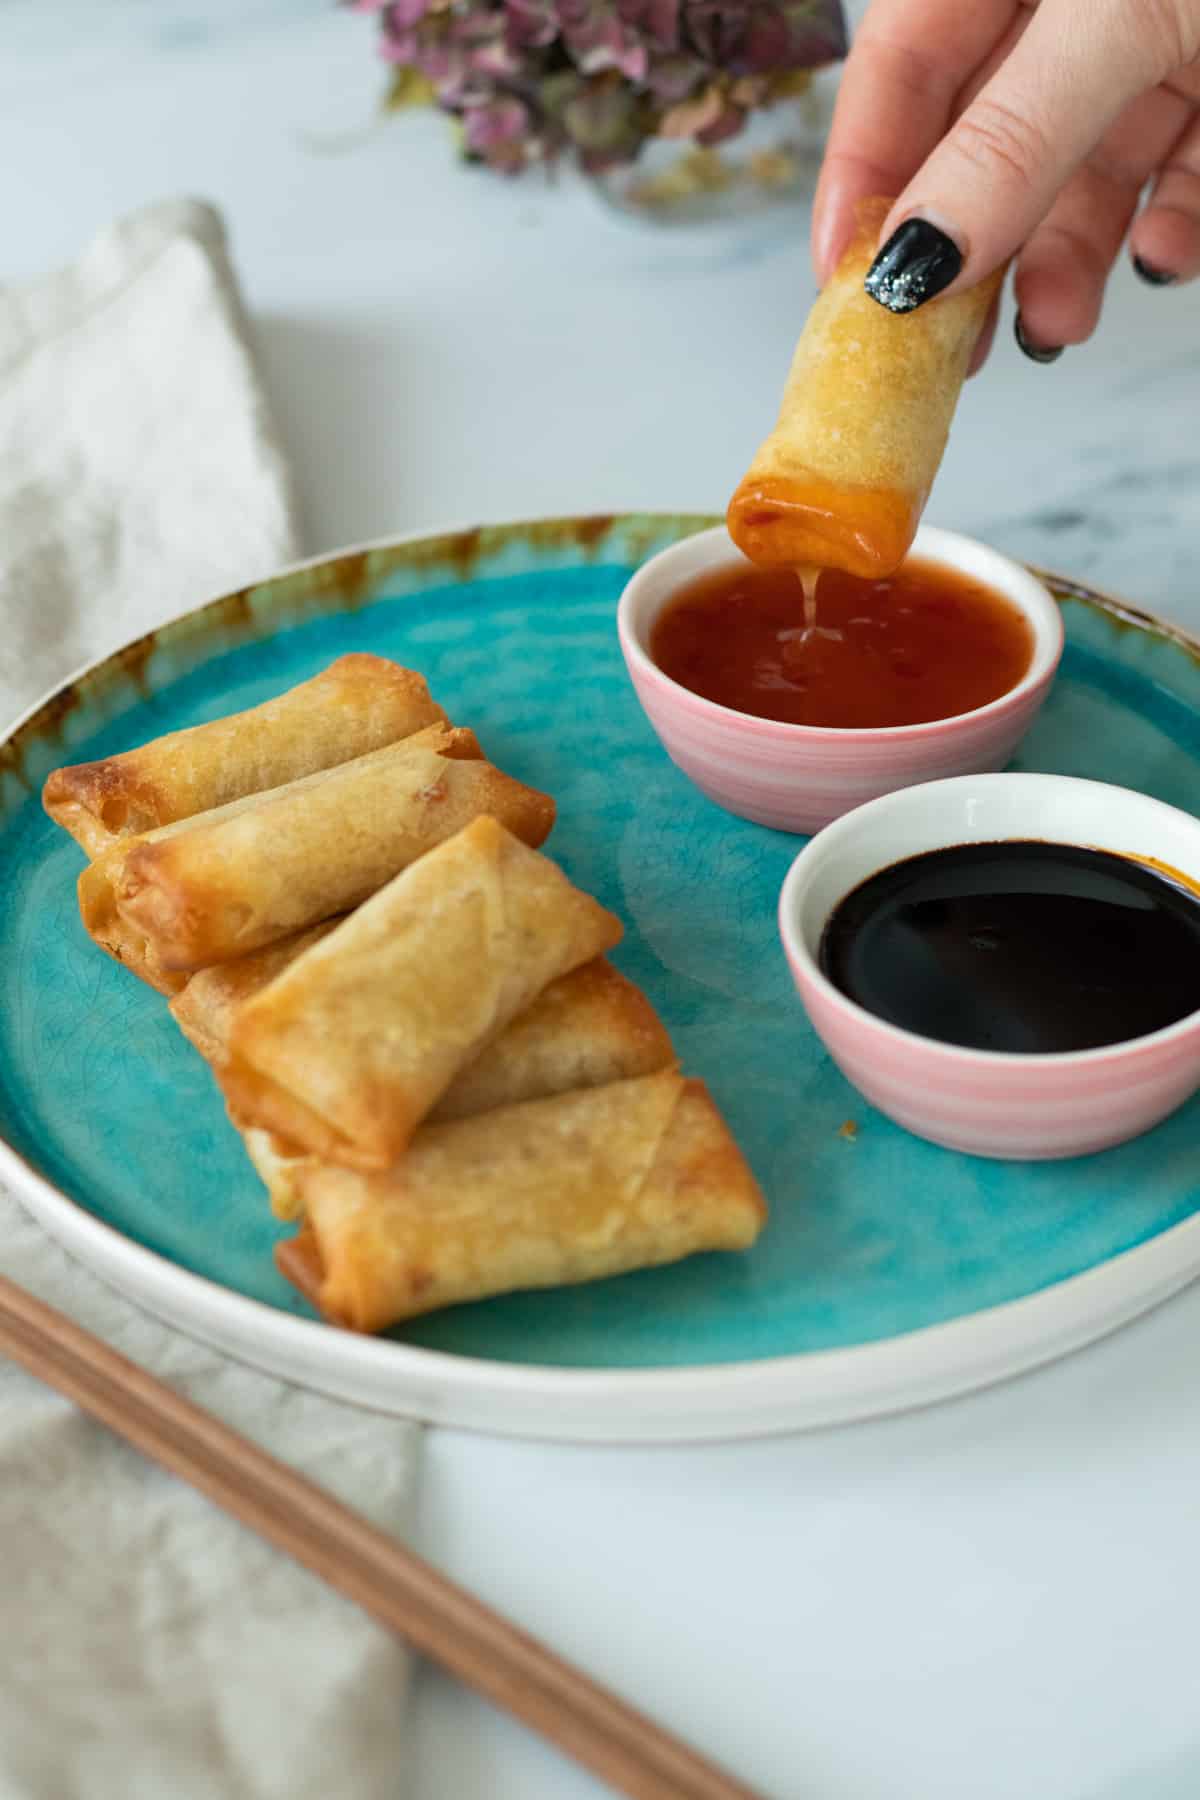 a spring roll being dipped in sauce